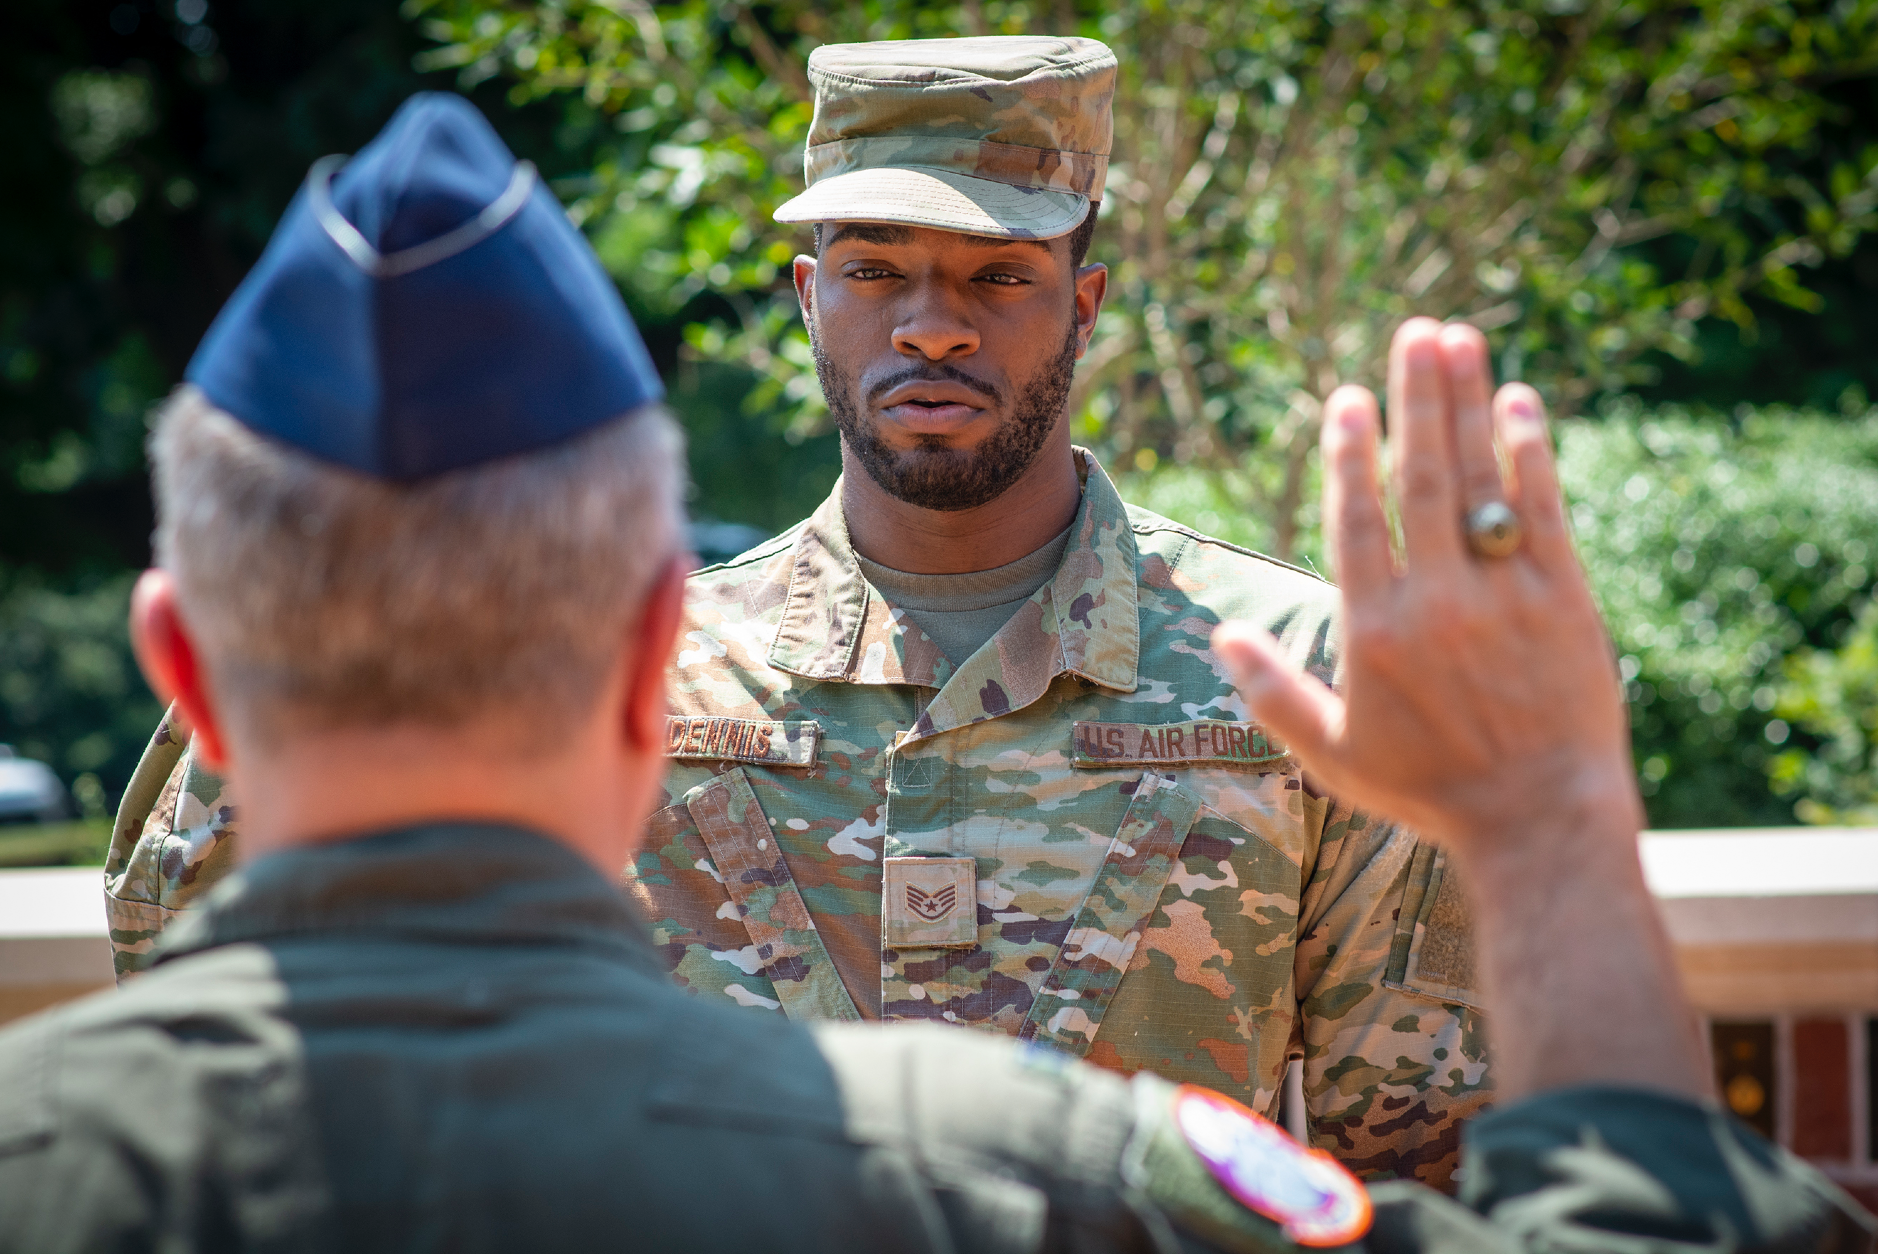 An Air Force officer takes the oath to commit to four more years of service during a reenlistment ceremony in Military Heritage Plaza